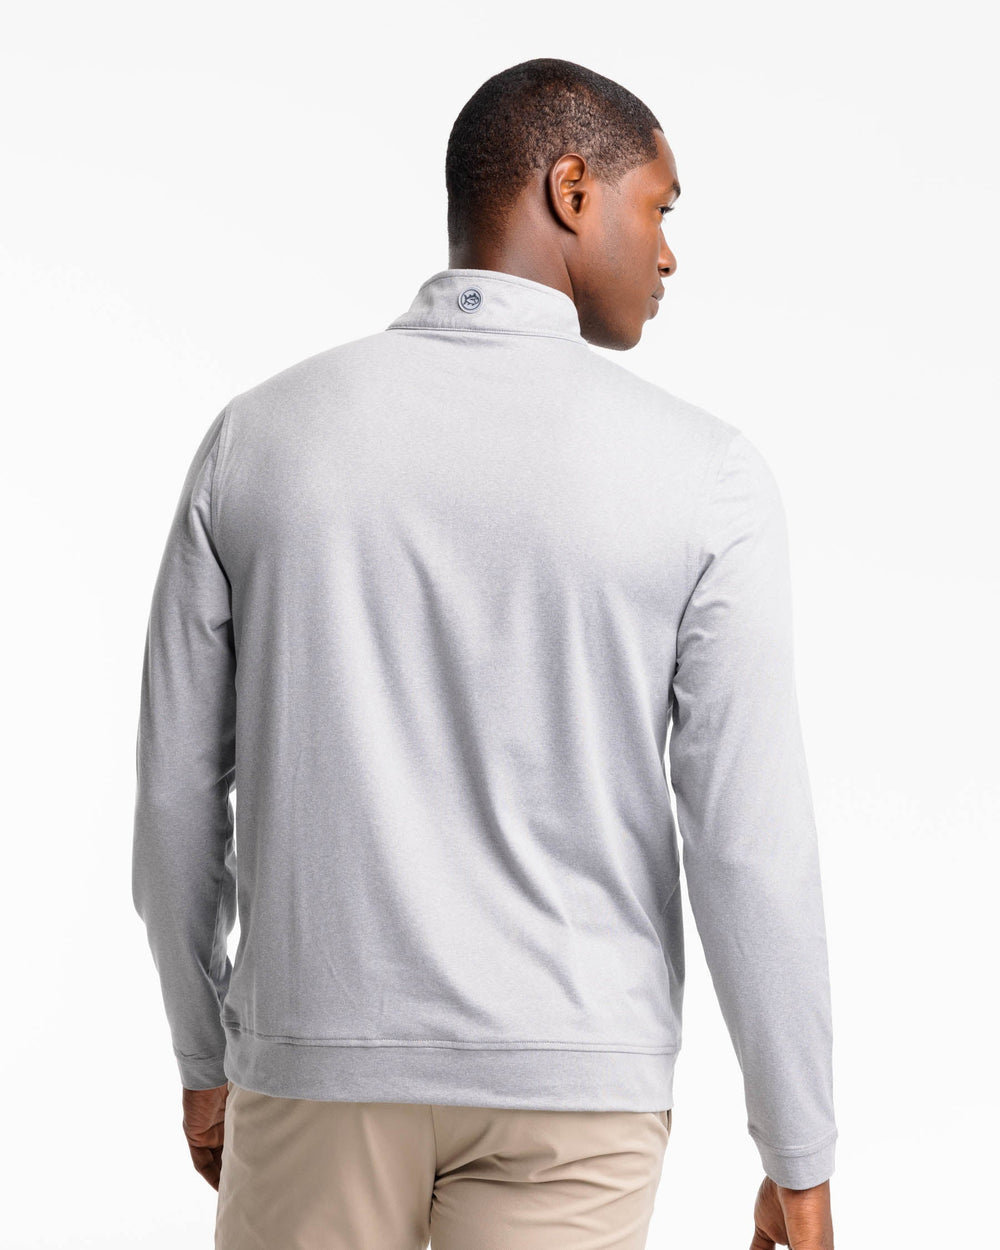 The back view of the Backbarrier Heather Performance Quarter Zip Pullover by Southern Tide - Heather Steel Grey